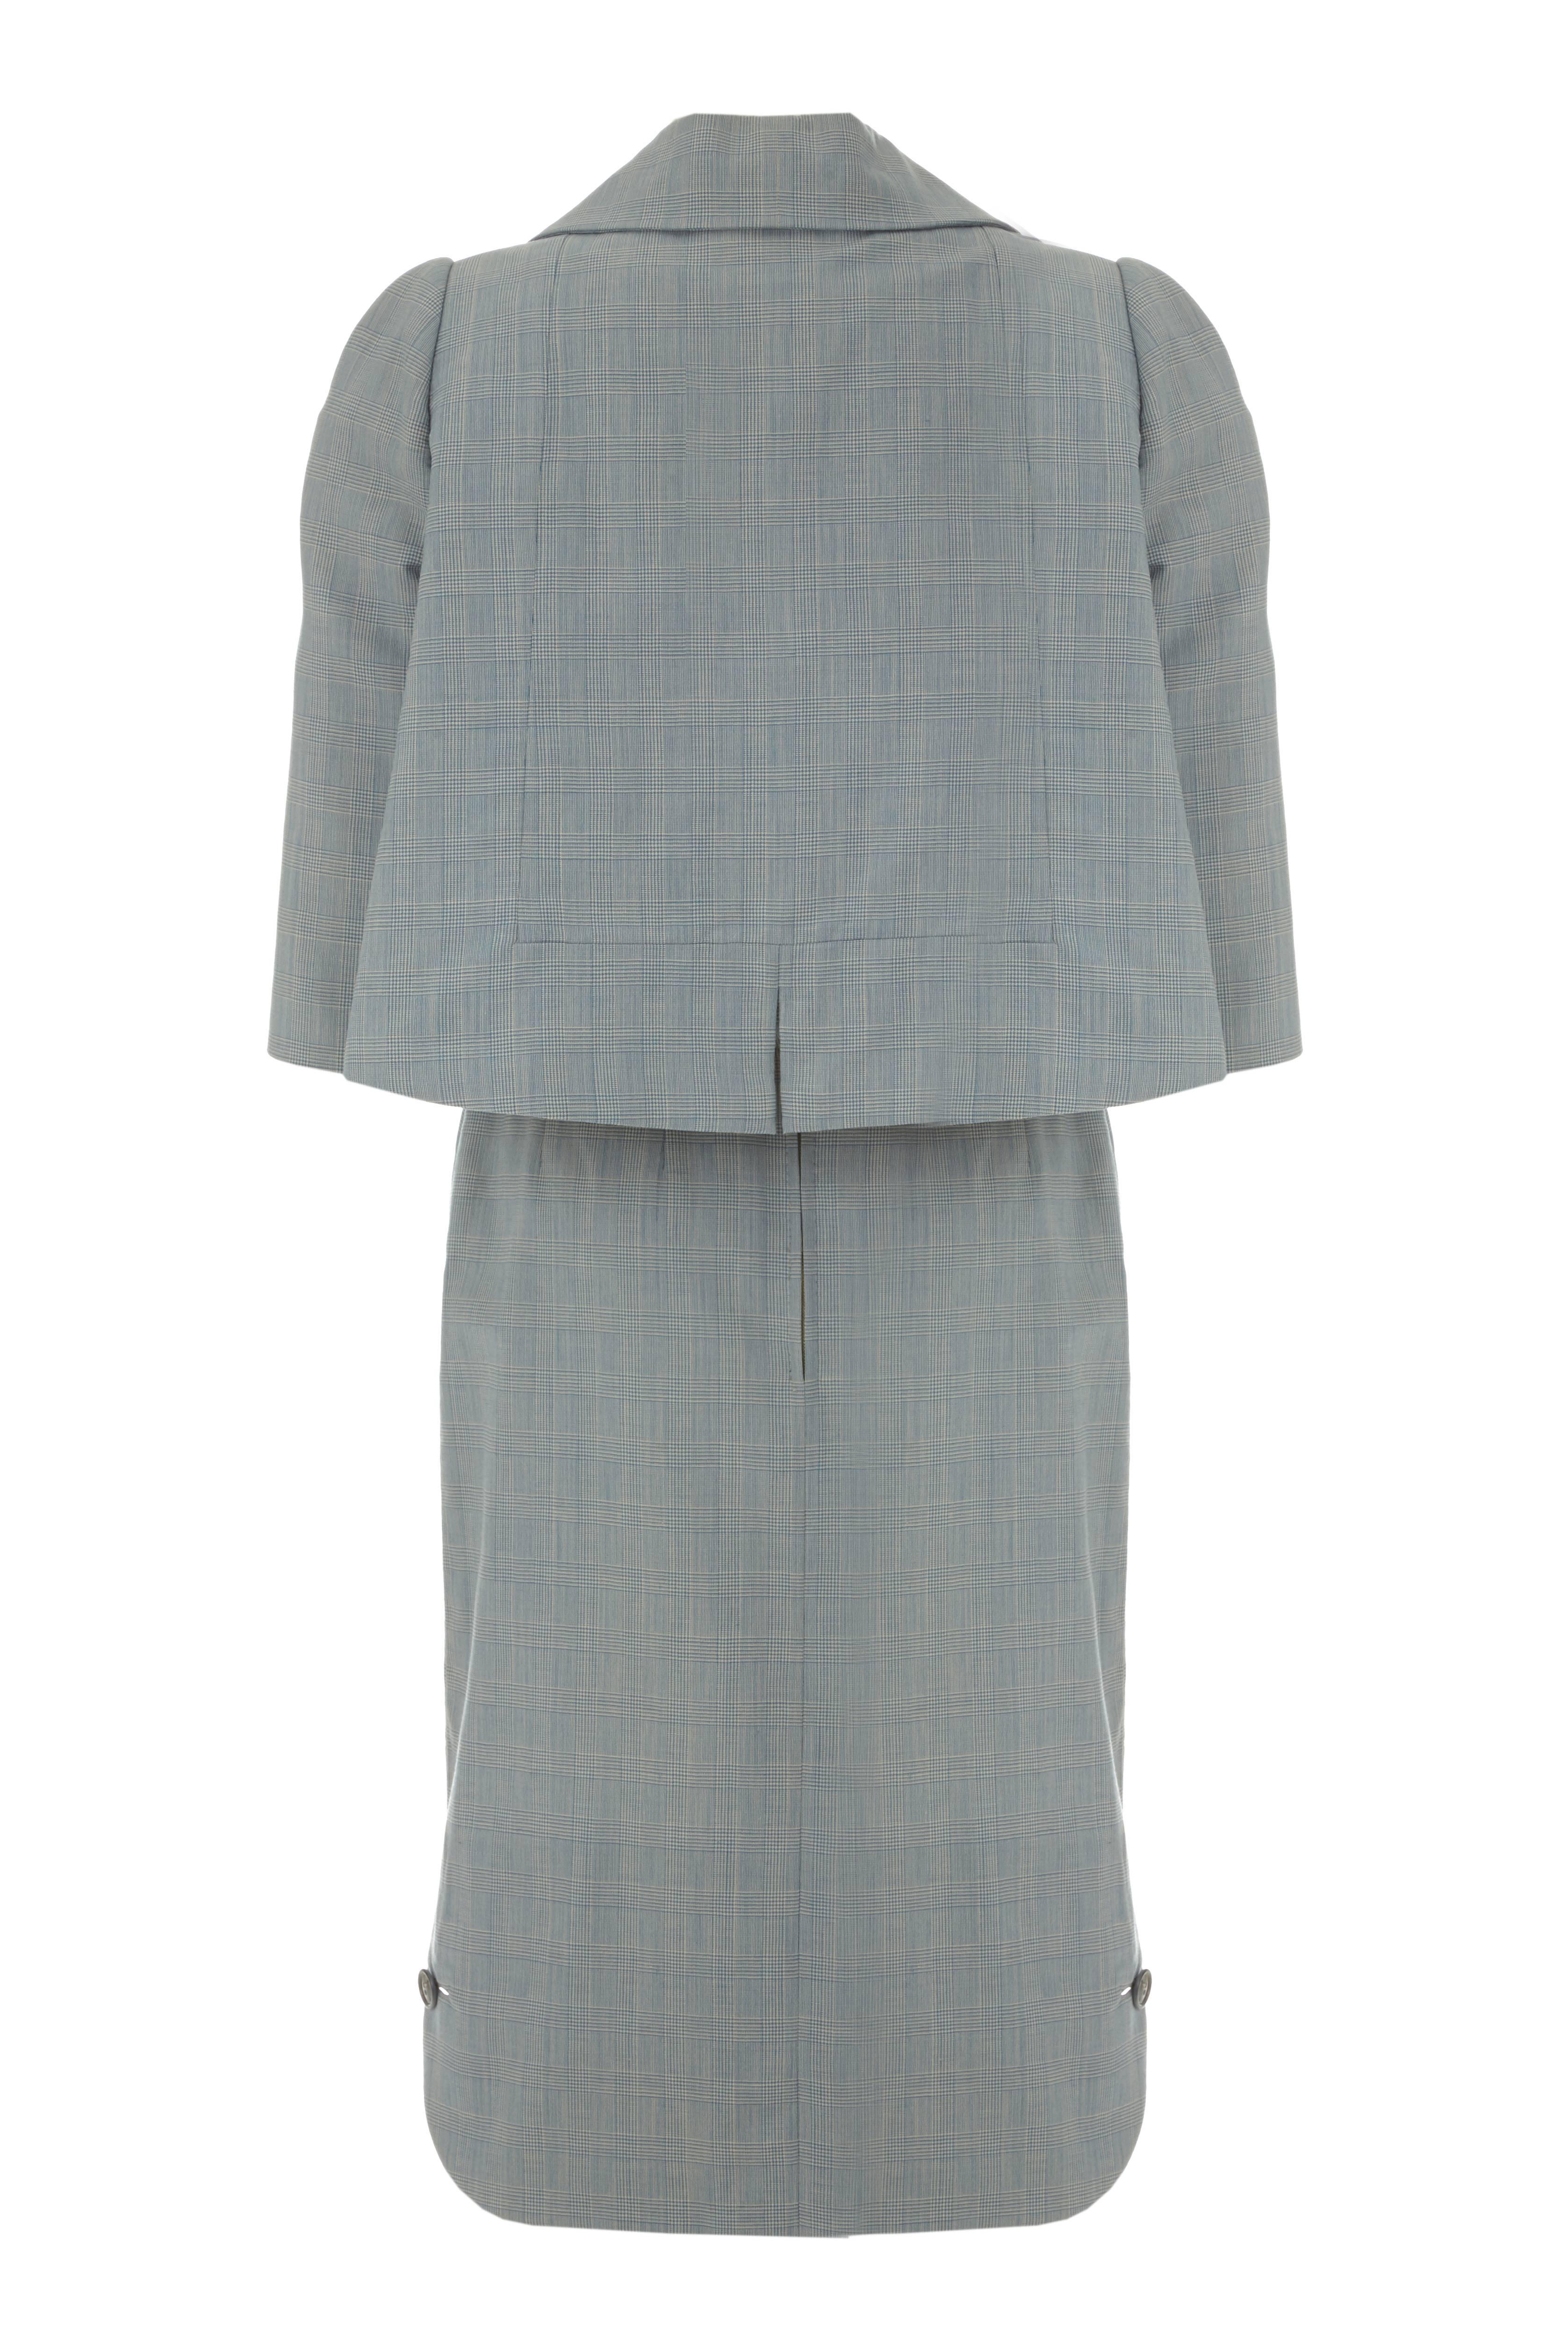 Vintage 1960s James Galanos blue Prince of Wales check fine wool suit consisting of a soft tailored jacket over a sleeveless dress.  A superb example of Hollywood couture this classic 60s suit is fully of quirky details with huge pockets at the